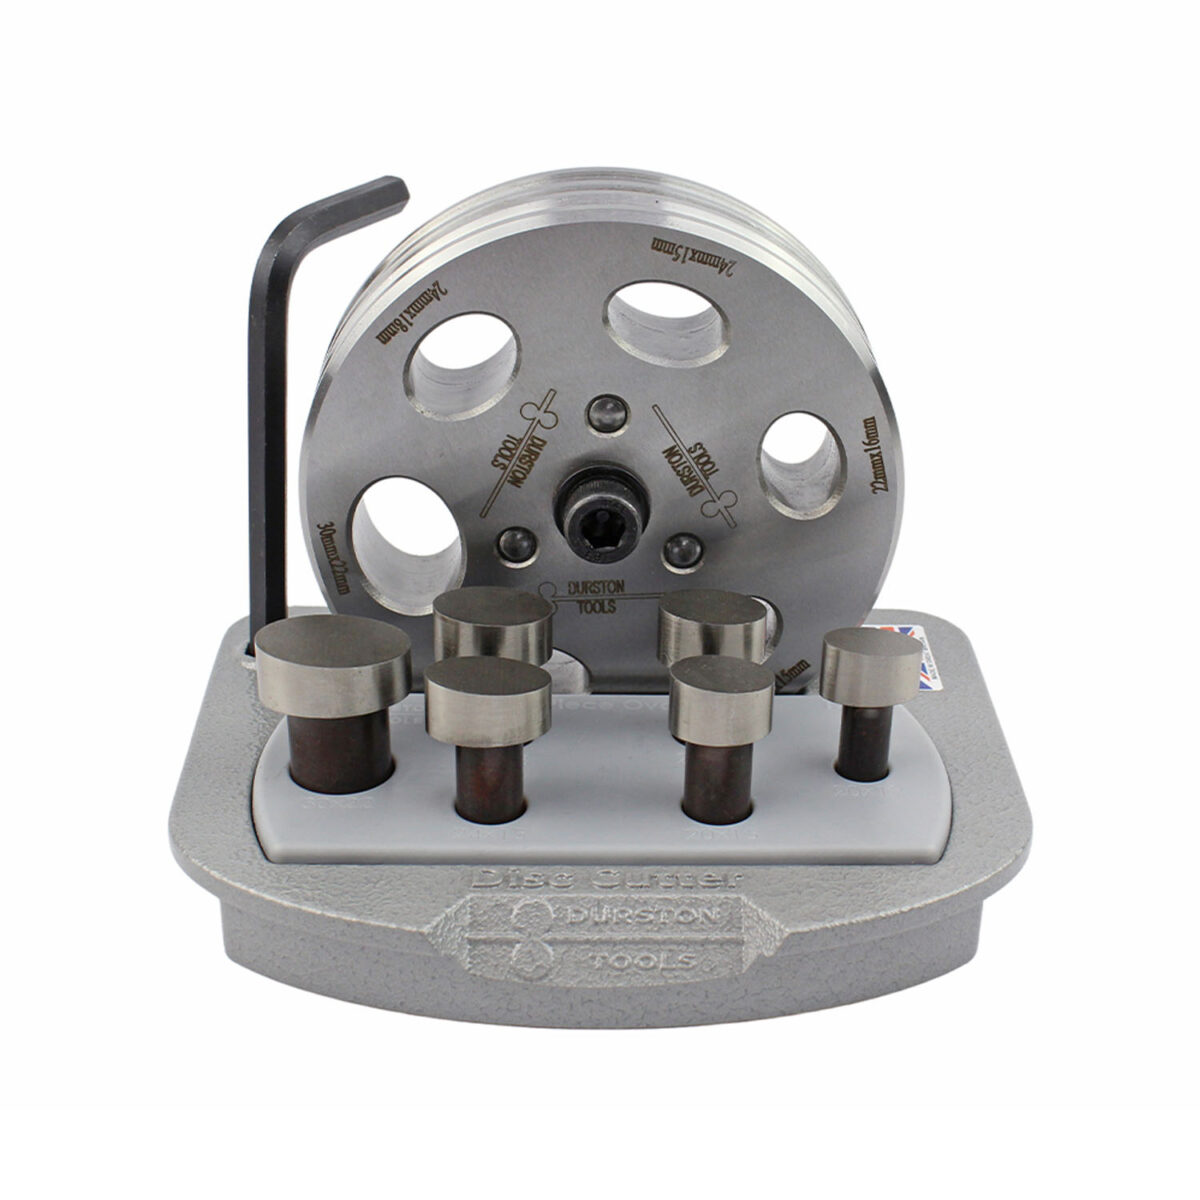 1216 durston oval disc cutter 2